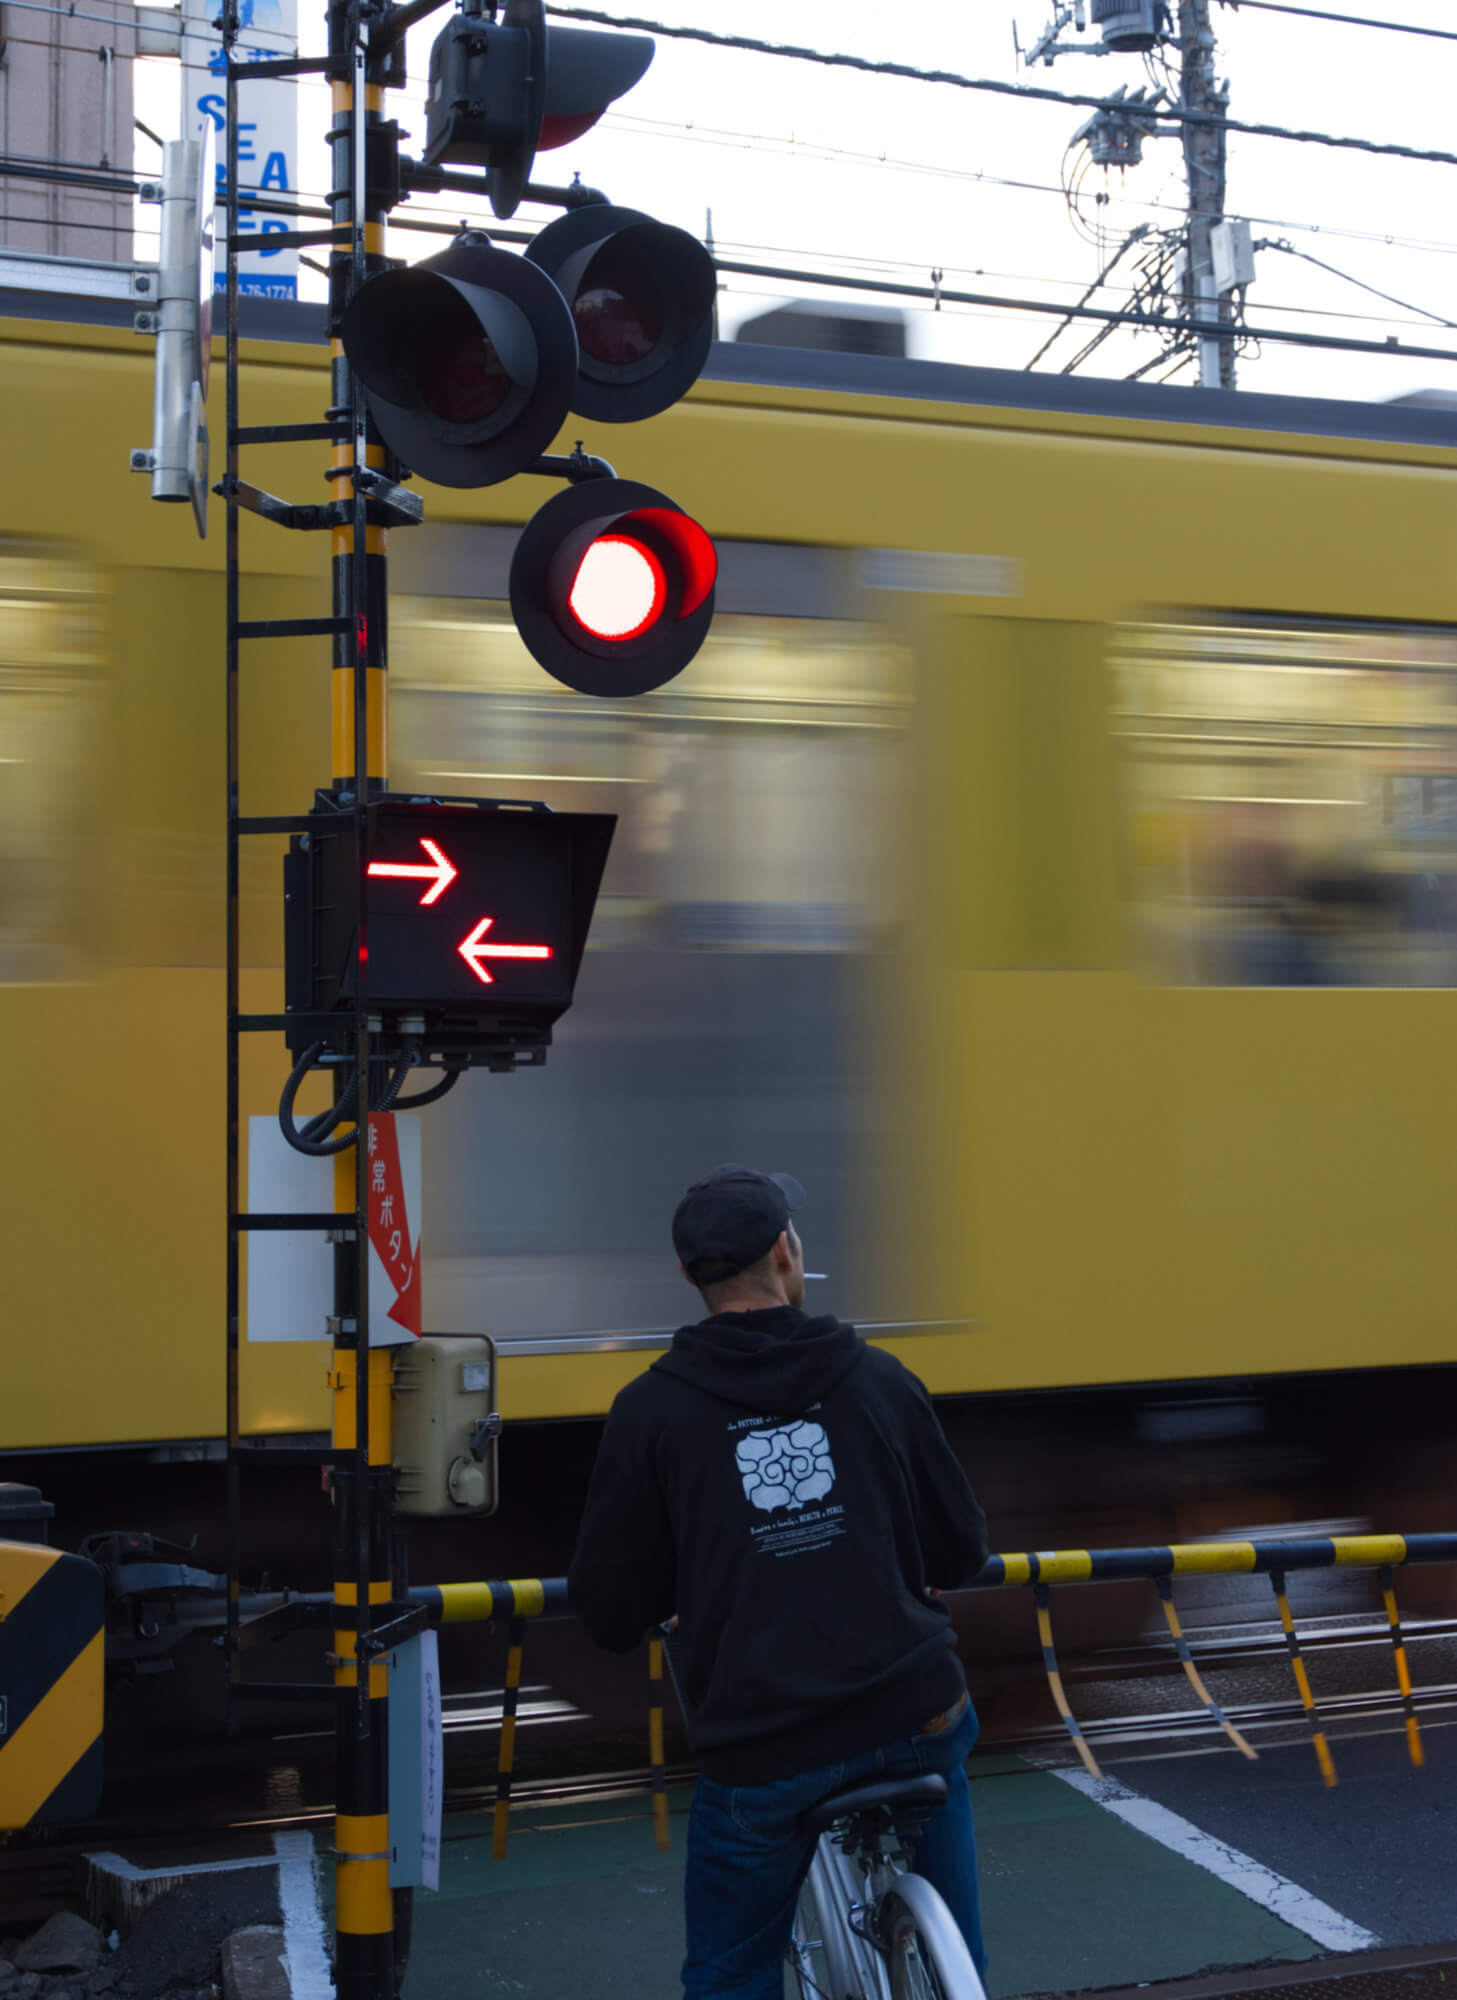 A man on a bike waits at a level crossing as a yellow train speeds past